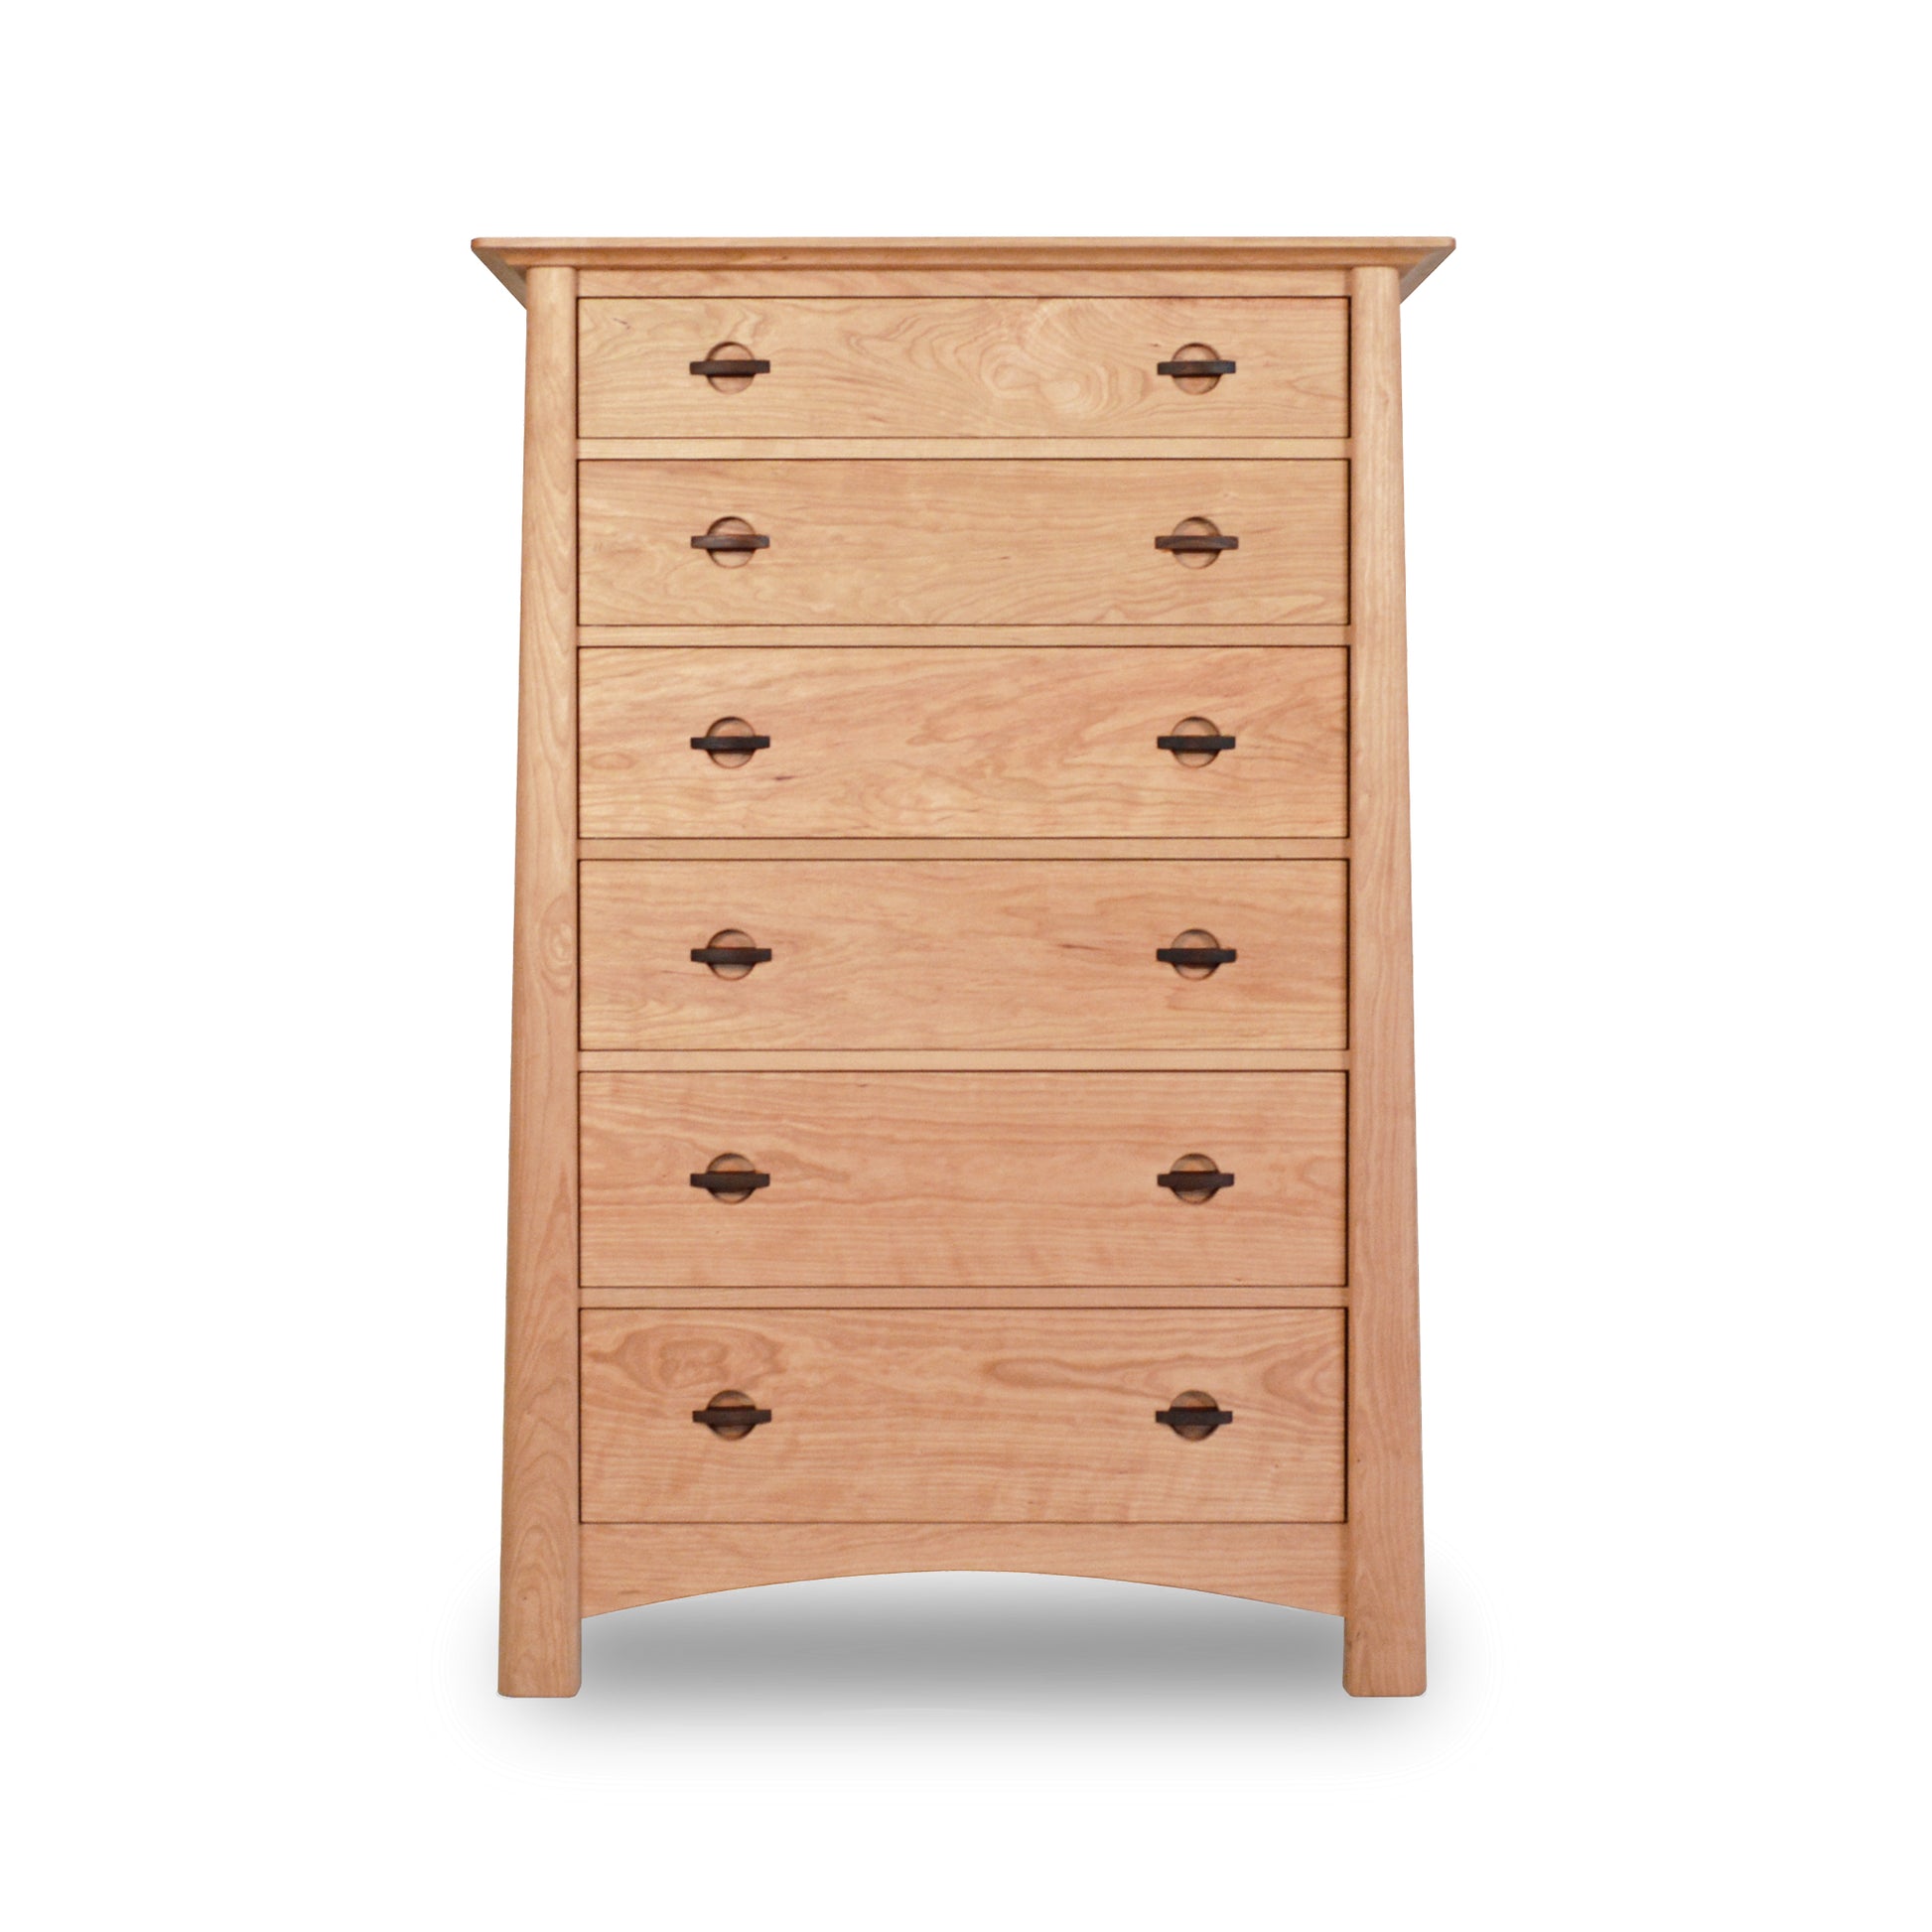 An eco-friendly Maple Corner Woodworks Cherry Moon 6-Drawer Chest with metal handles isolated on a white background.